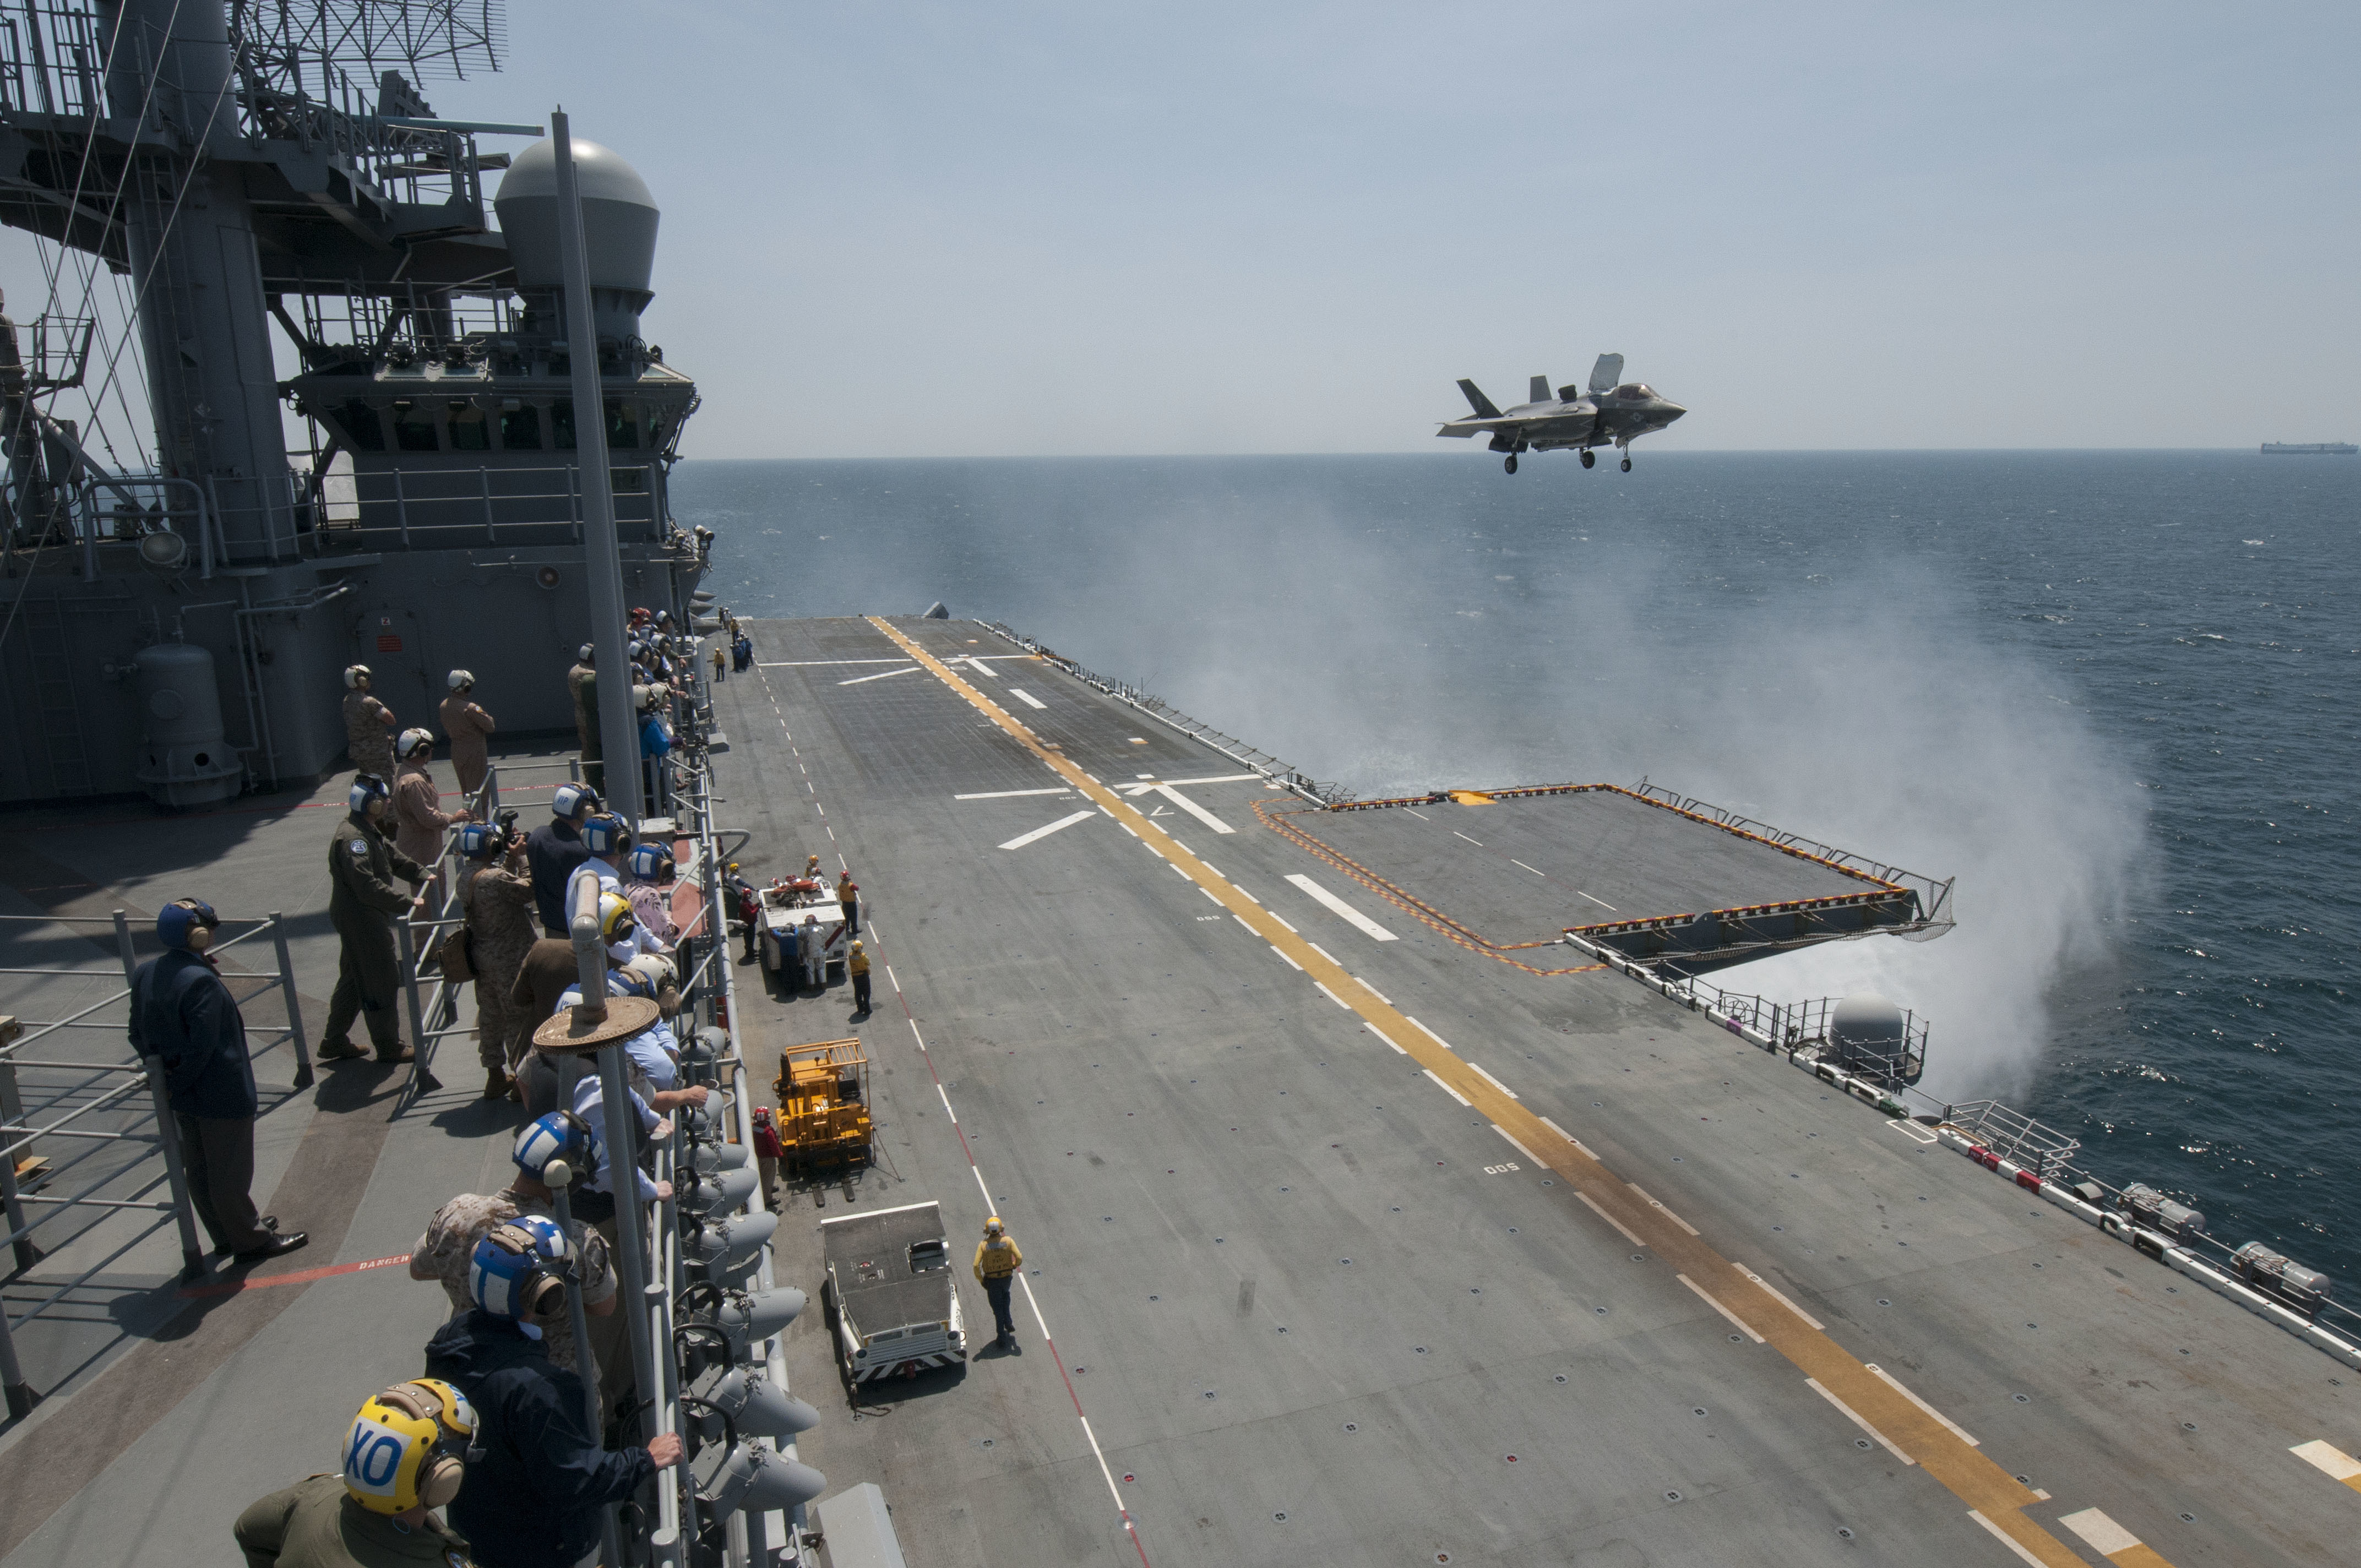 Sailors and distinguished visitors watch an F-35B Lightning II aircraft conduct vertical takeoff and landing flight operations aboard the amphibious assault ship USS Wasp (LHD 1) on May 20, 2015. US Navy photo.